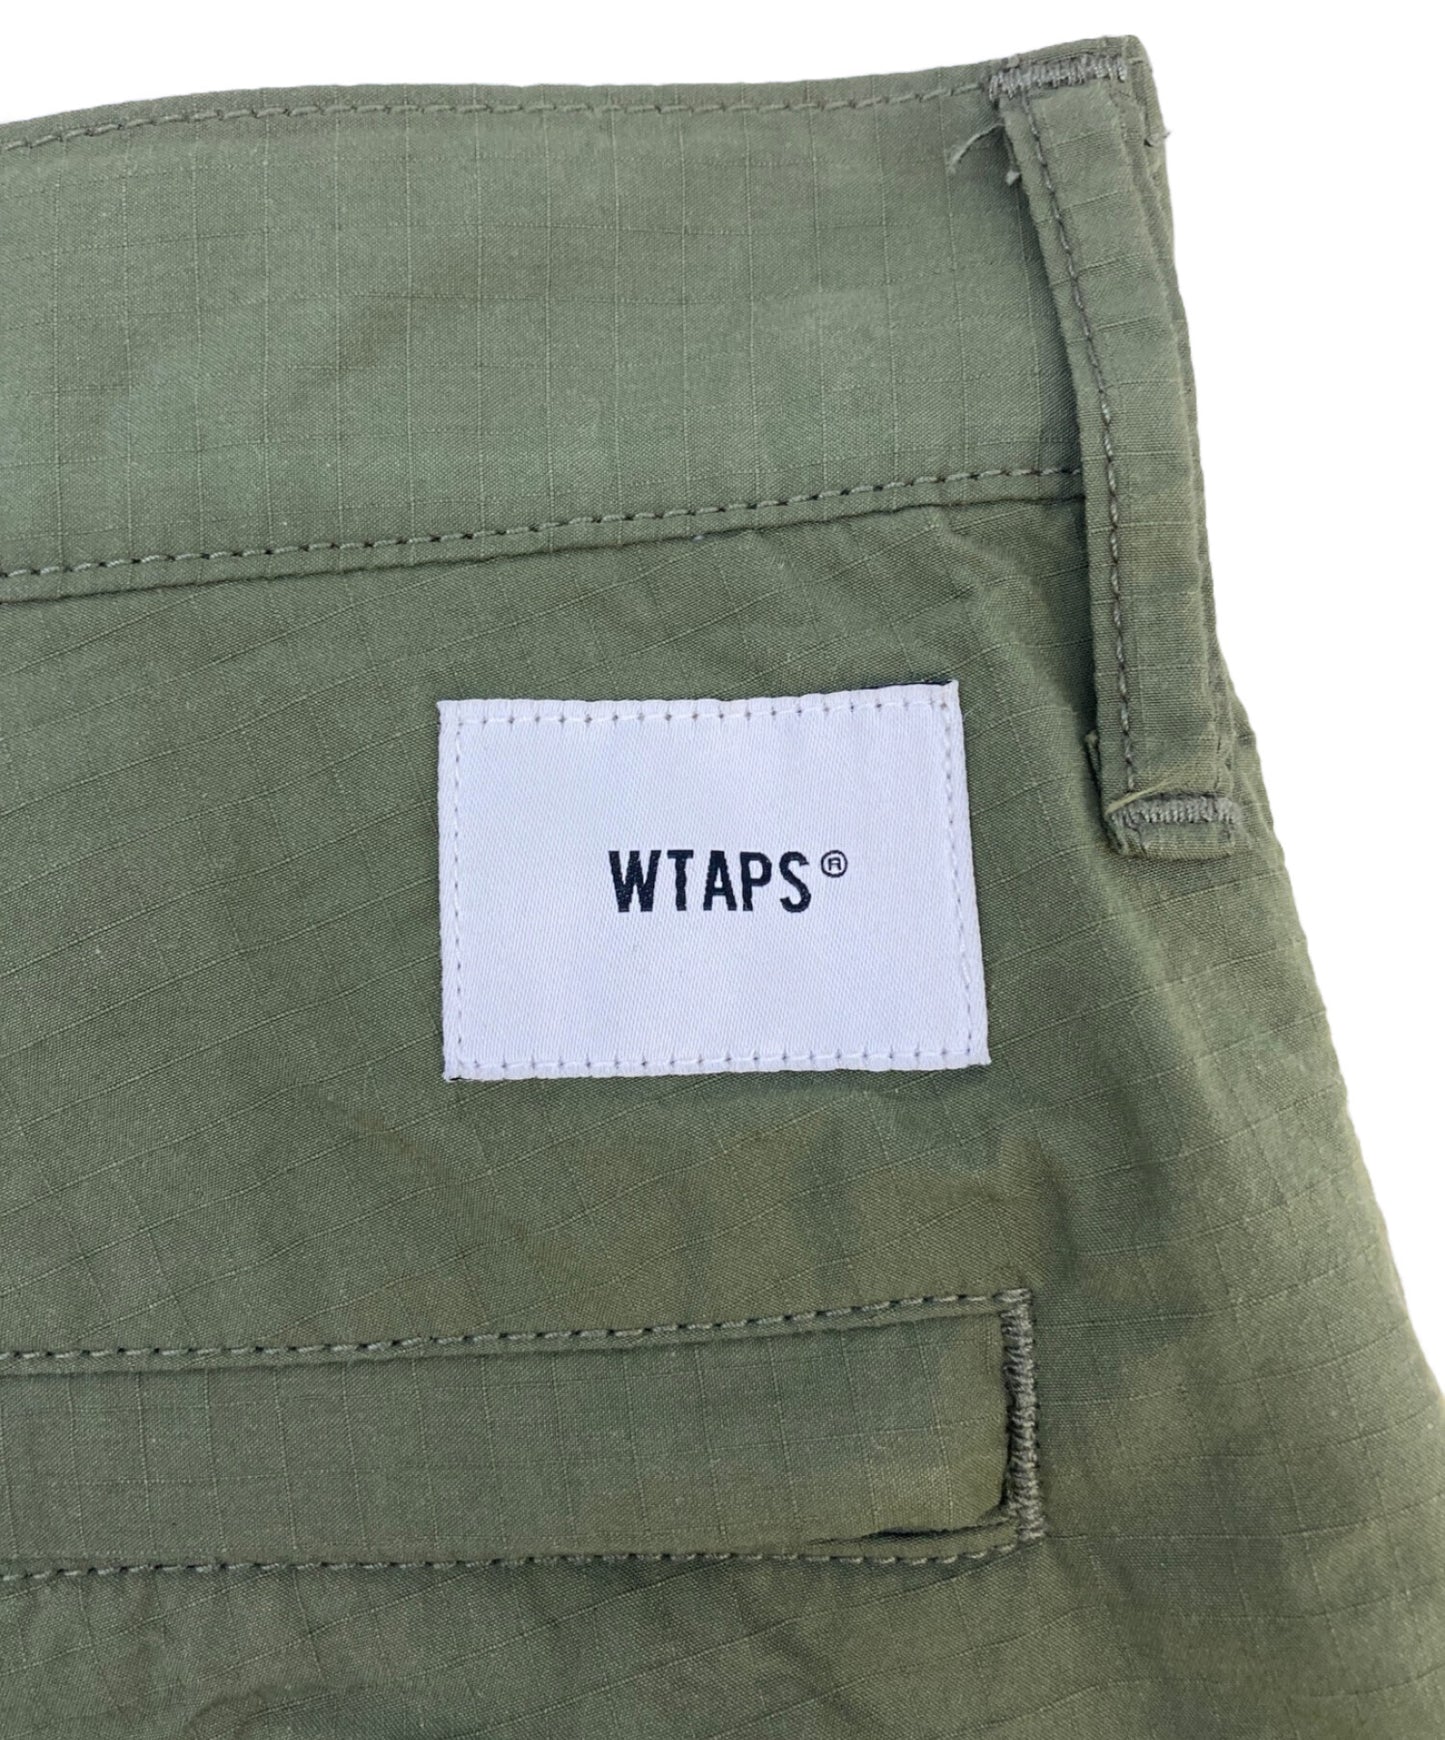 [Pre-owned] WTAPS BGT TROUSERS NYCO RIPSTOP Ripstop WTAPS Double Taps CORDURA Cordura Nylon Nylon Cargo Pants EX45COLLECTION Made in Japan Neighborhood NBHD 222WVDT-PTM06 222wvdt-ptm06